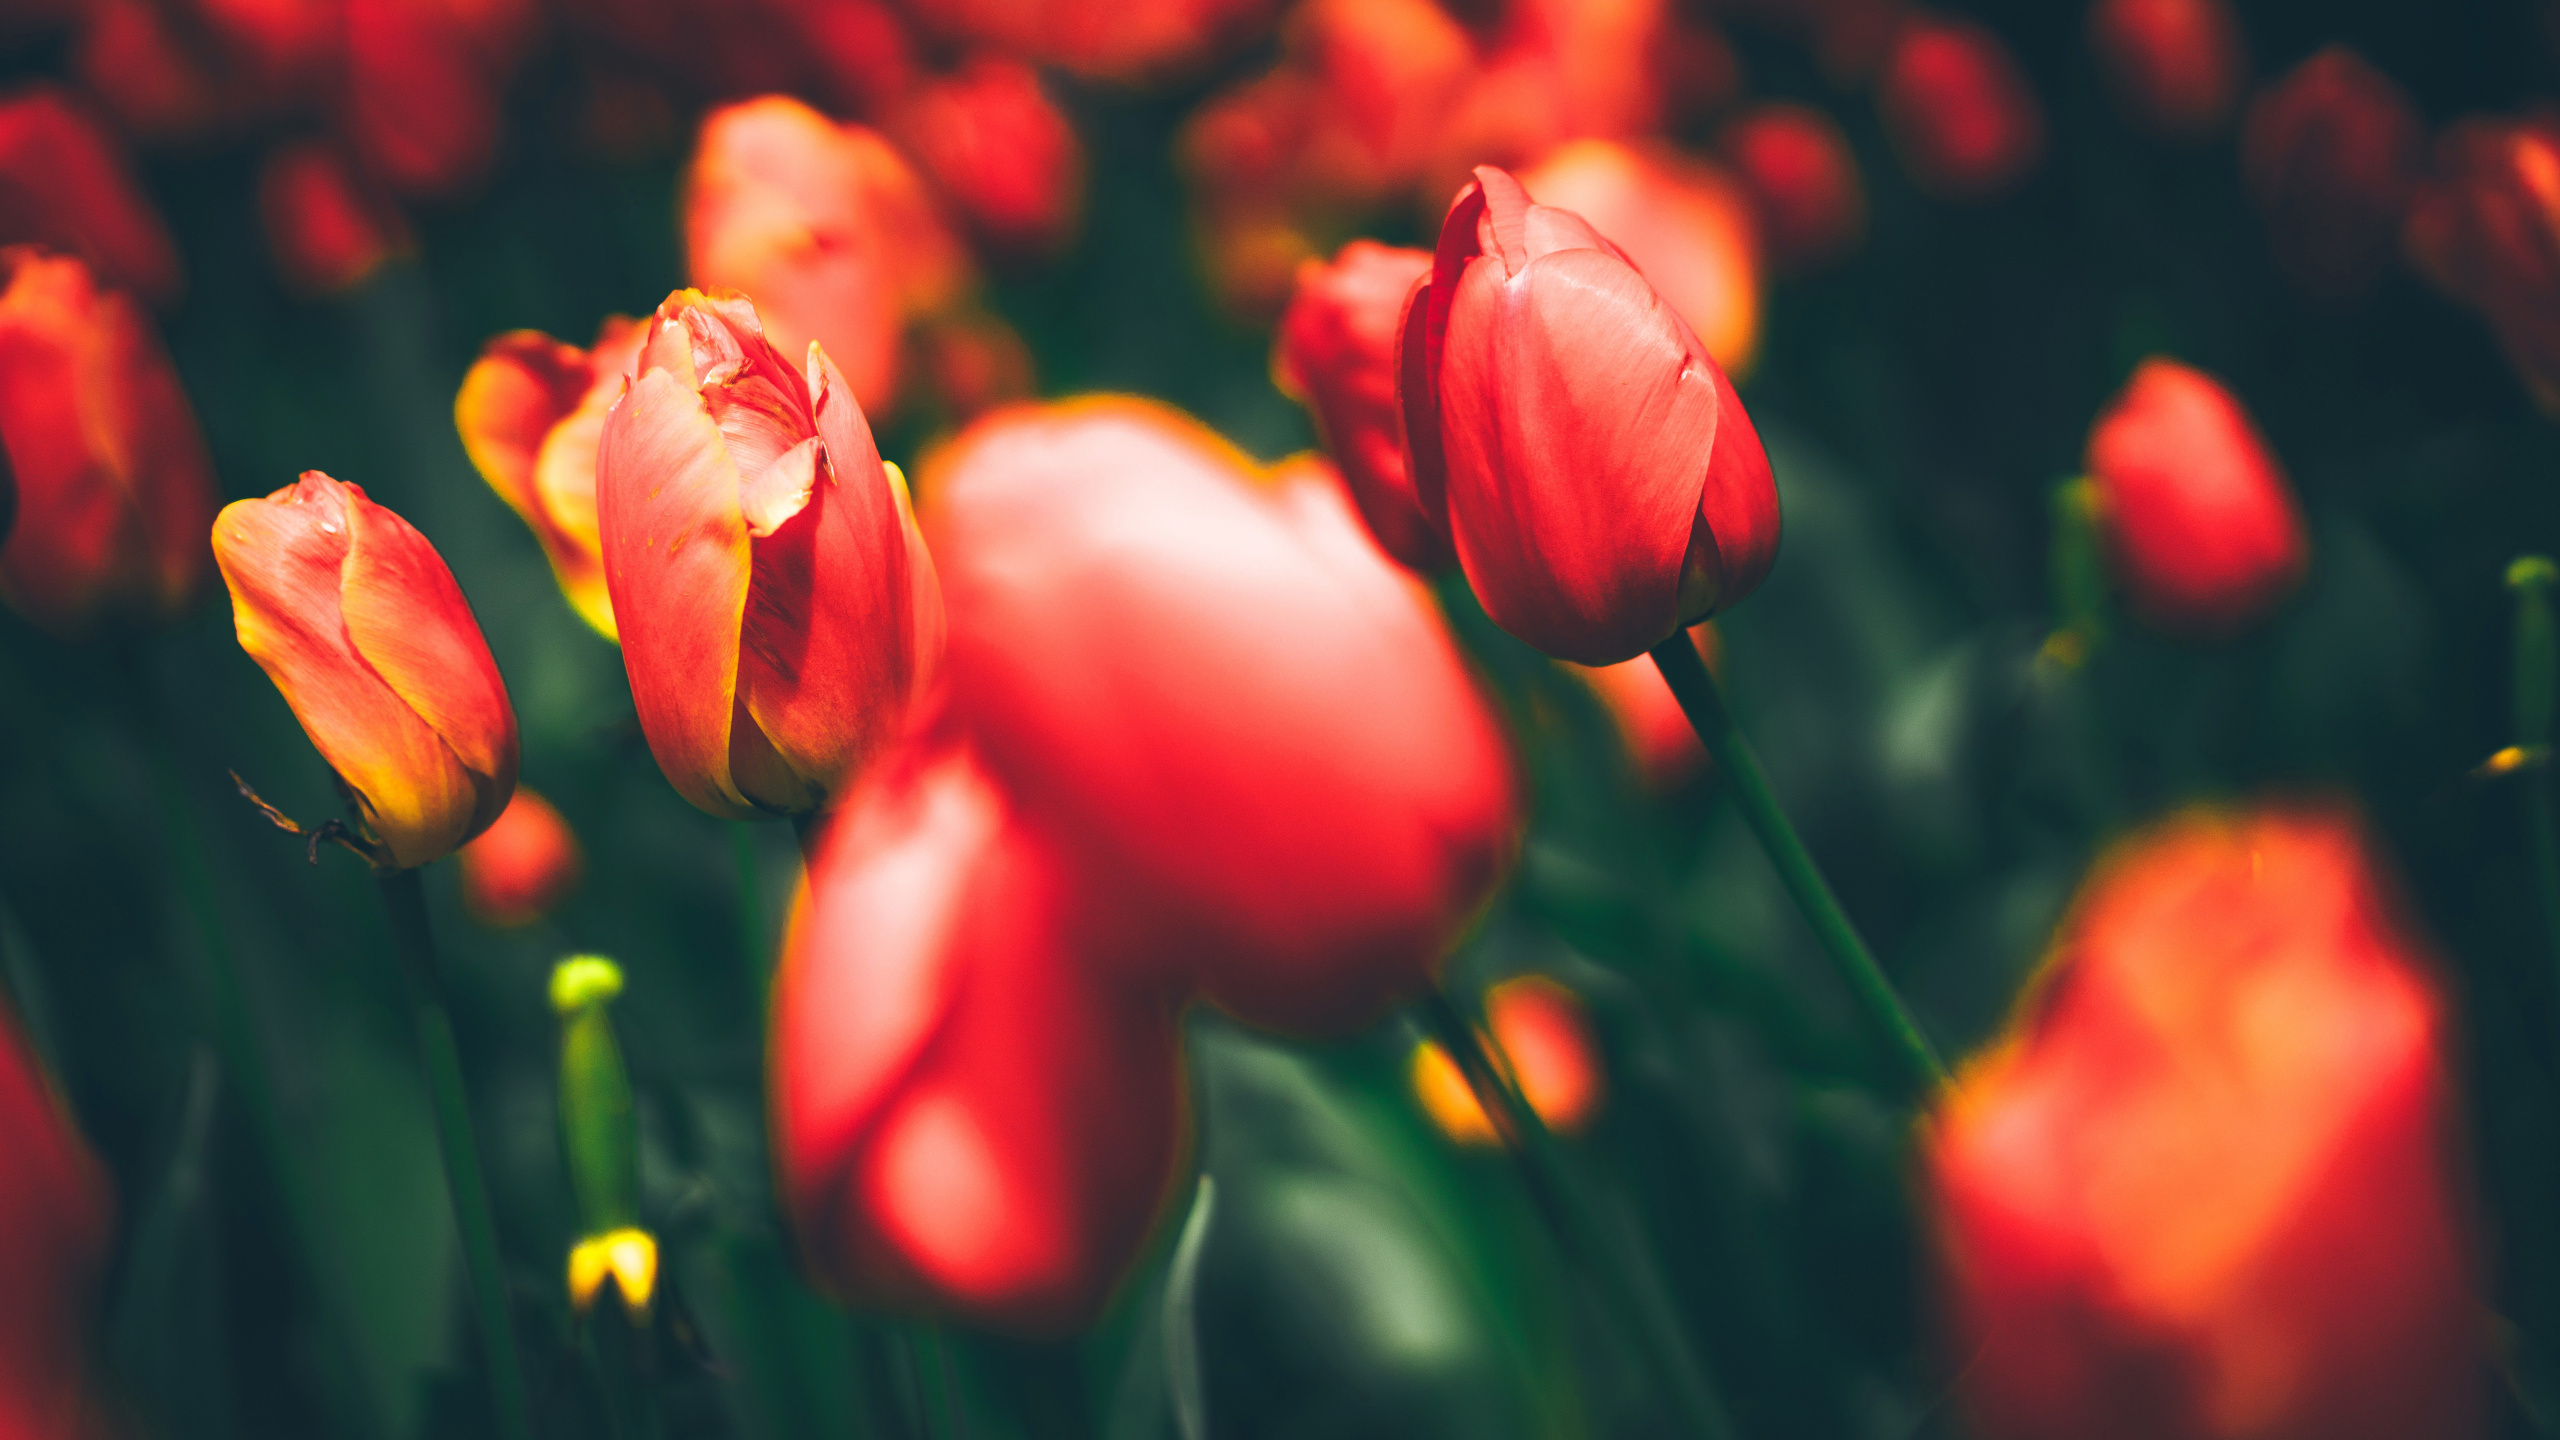 Red Tulips in Bloom During Daytime. Wallpaper in 2560x1440 Resolution